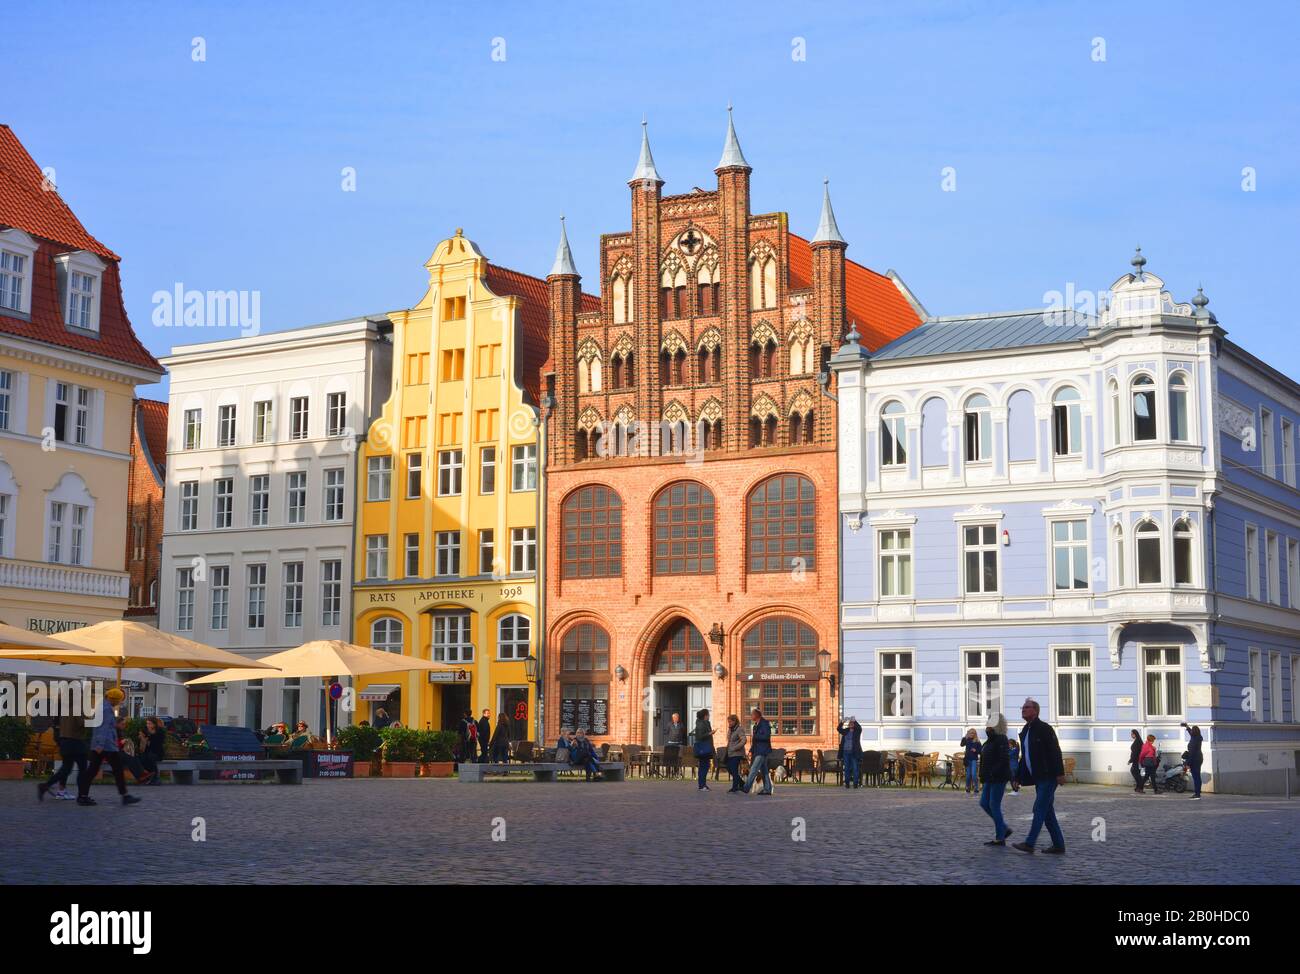 Stralsund, Germany 10-23-2019 view to the old market in the city center with the architecture and people passing Stock Photo